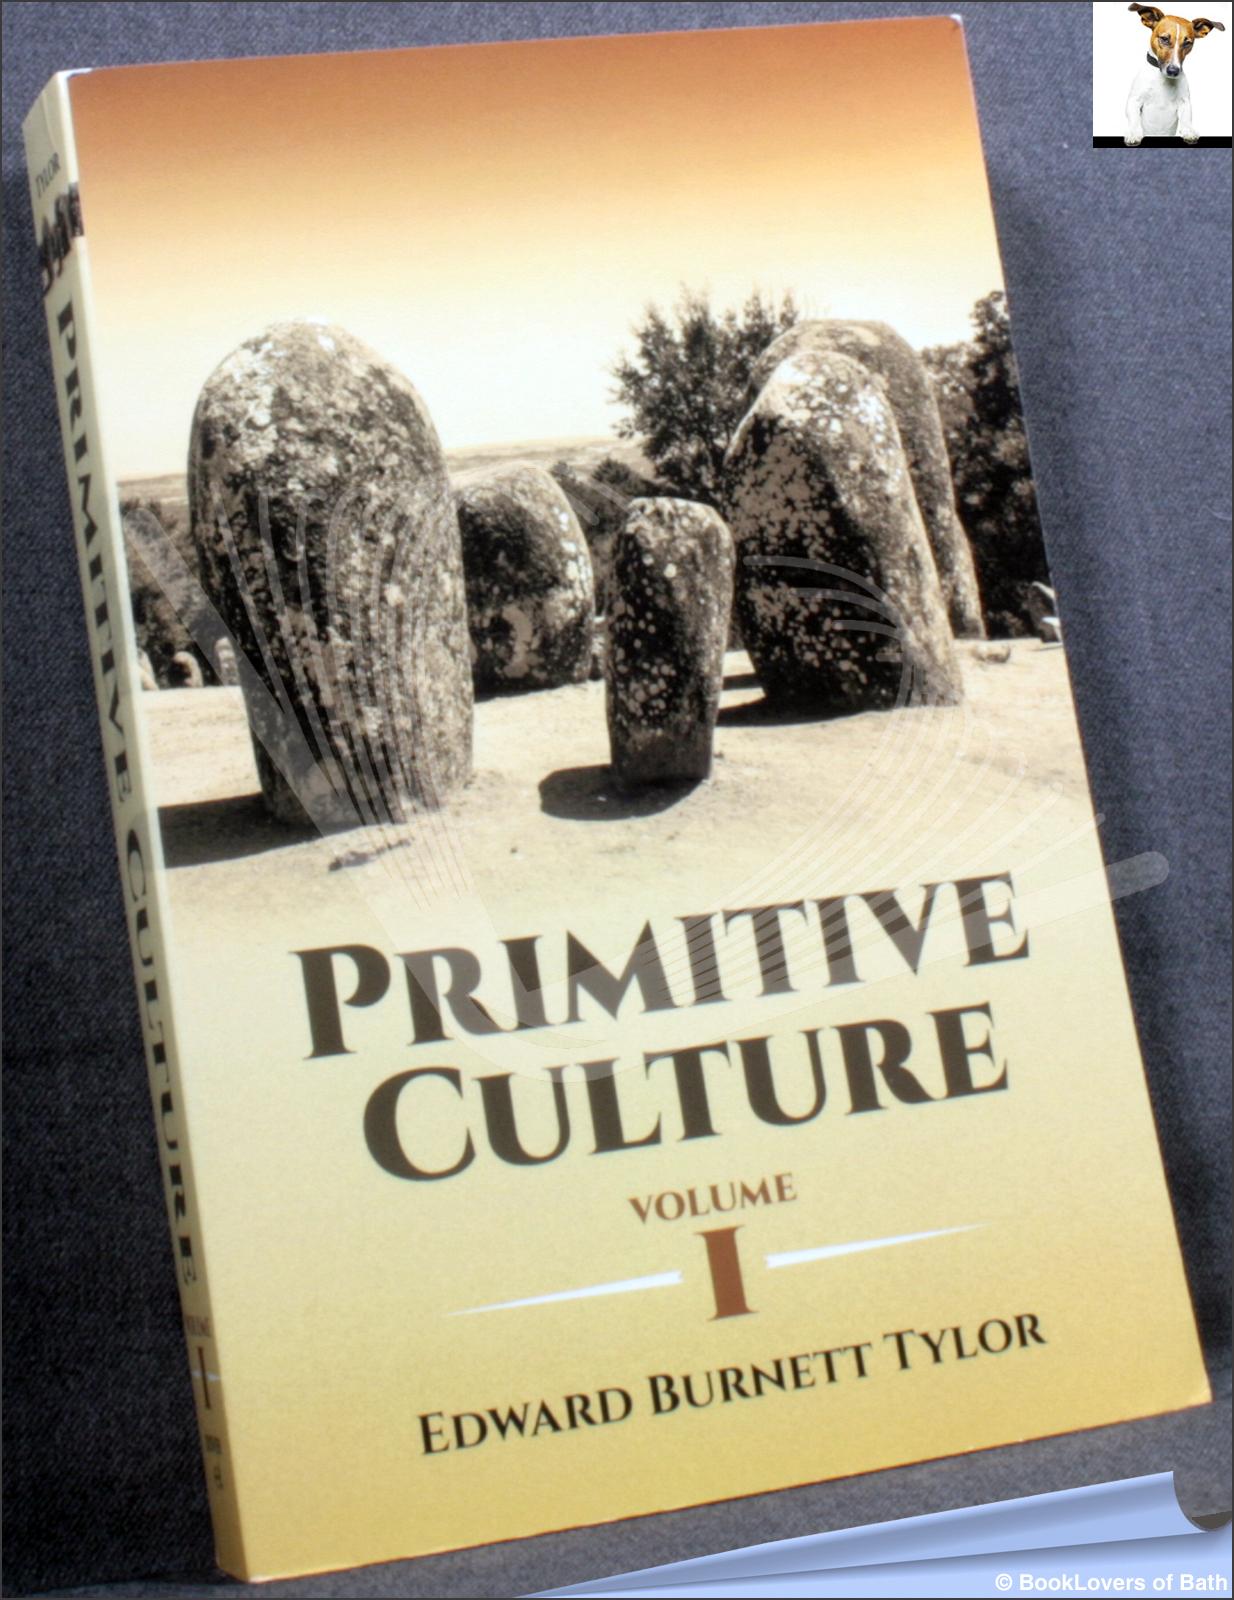 Primitive Culture: Researches Into the Development of Mythology, Philosophy, Religion, Language, Art and Custom in Two Volumes - Edward Burnett Tylor